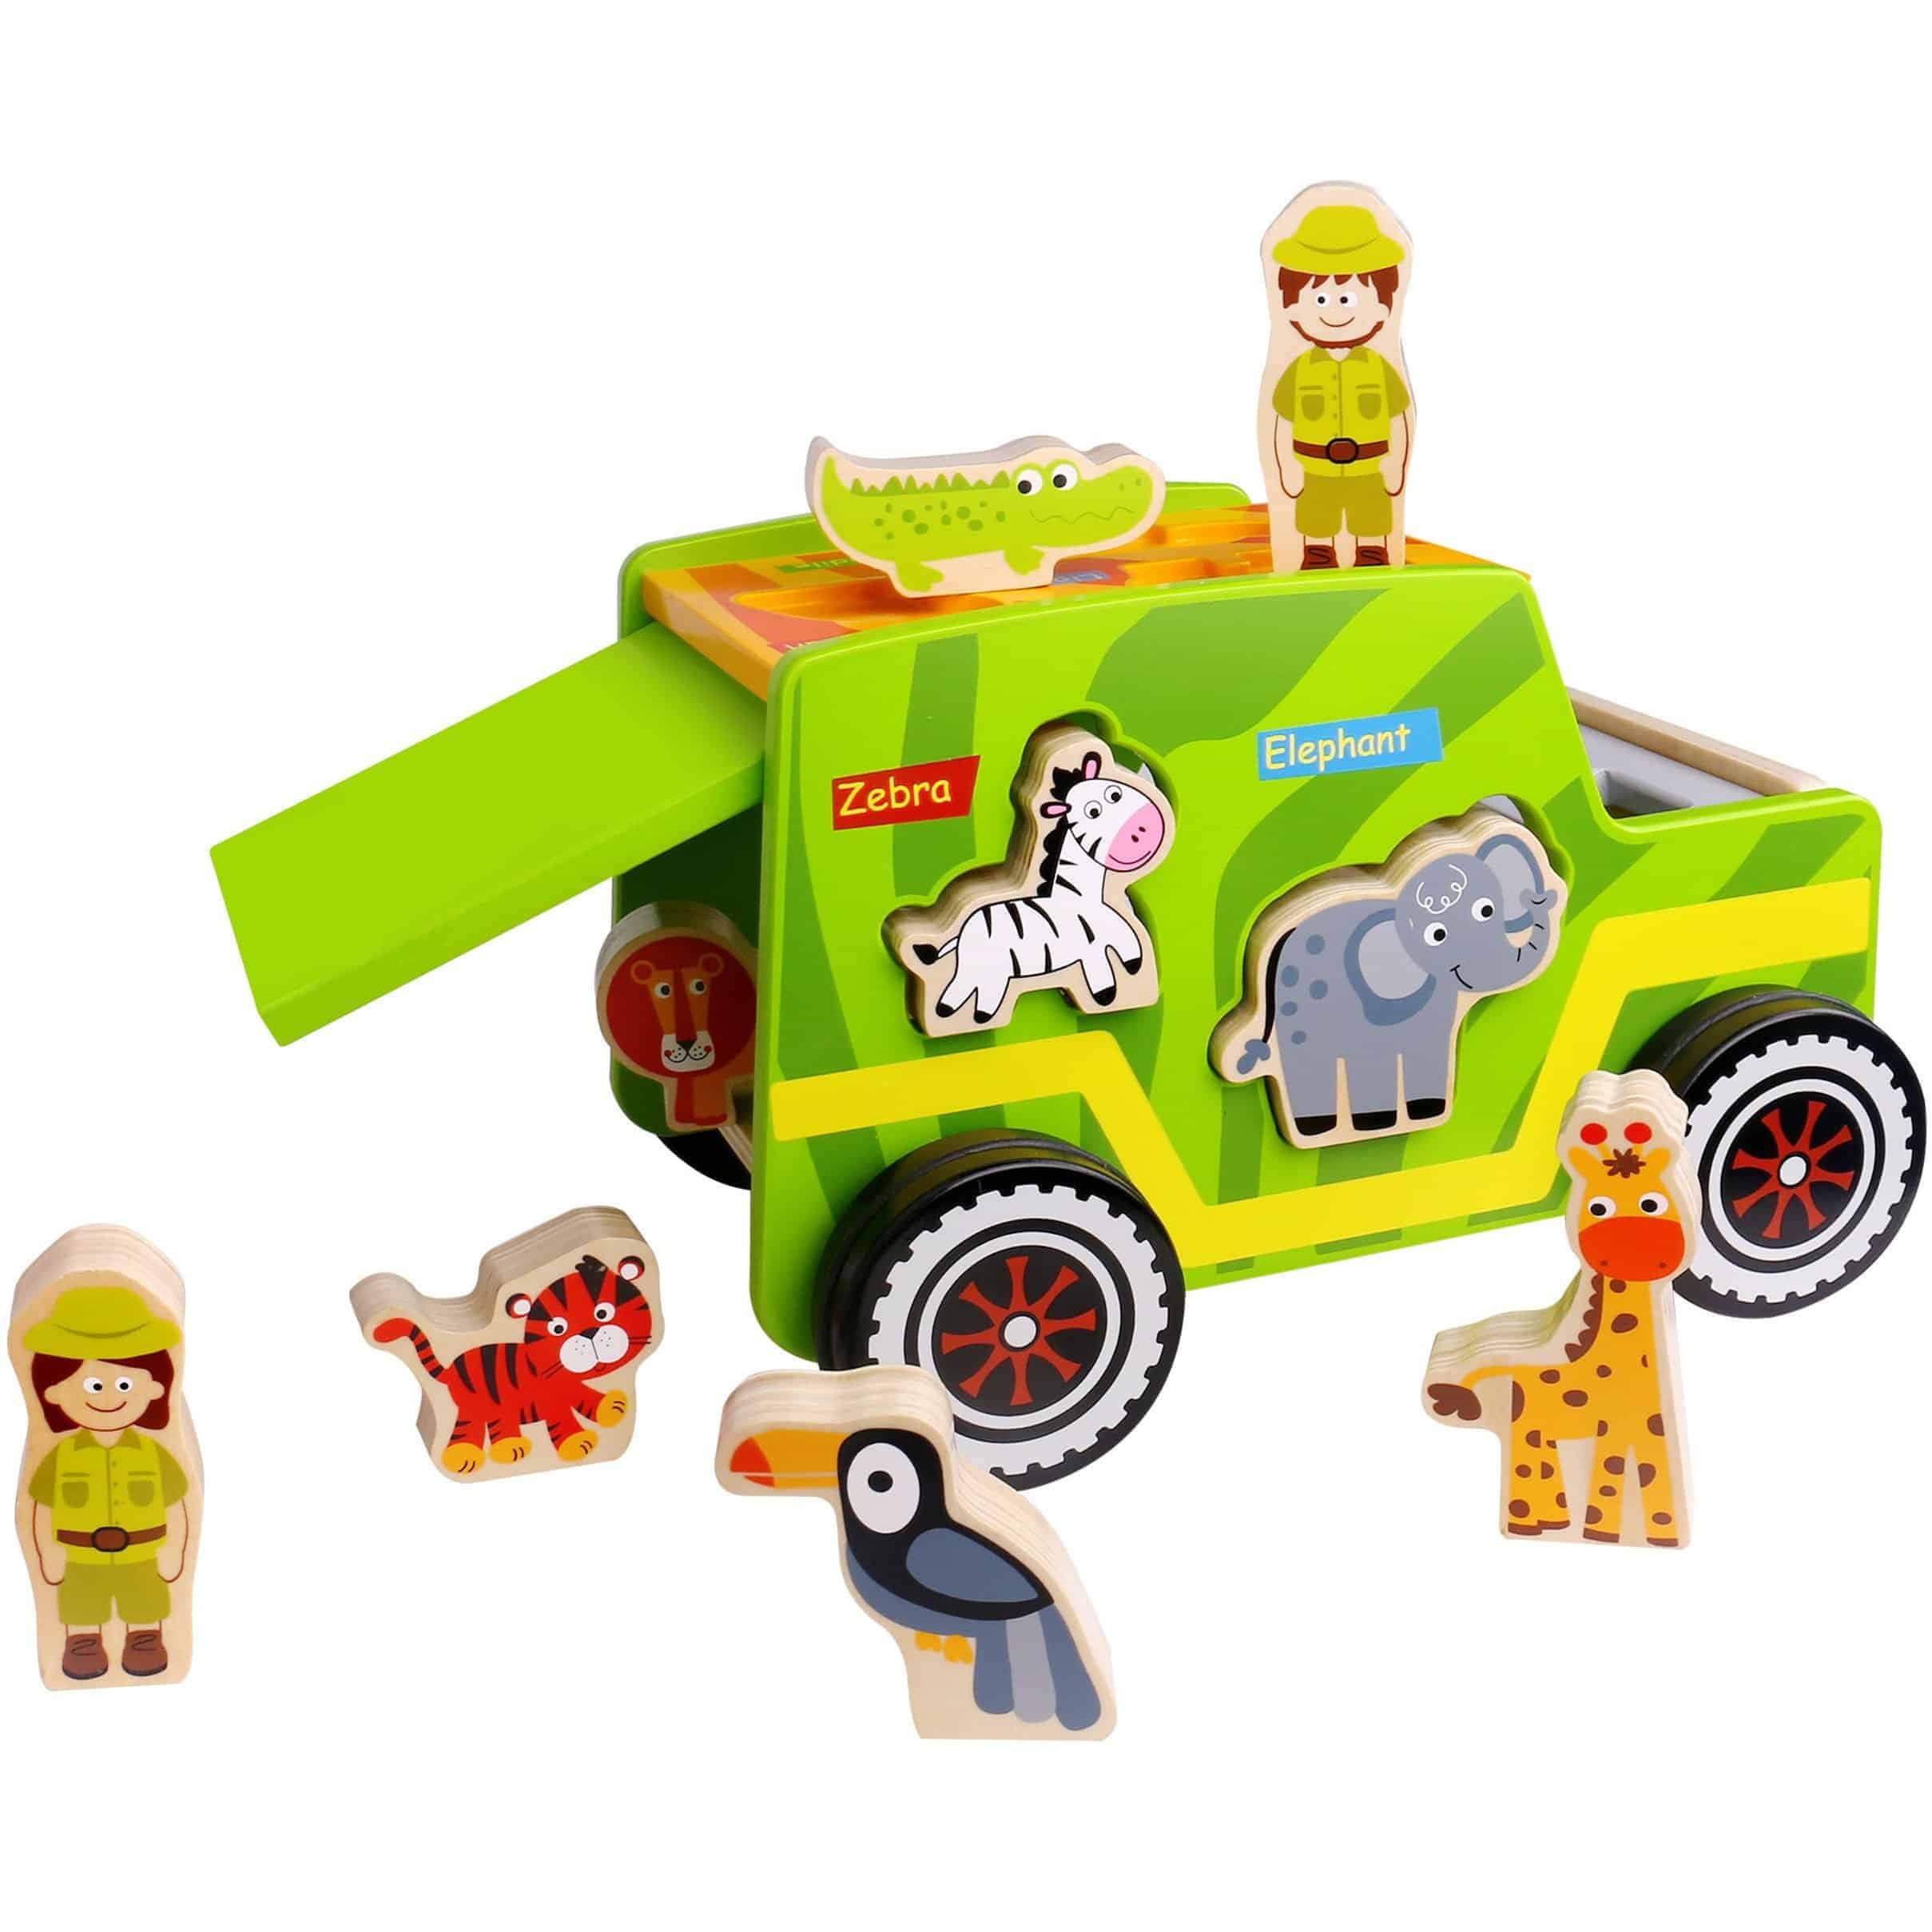 Easy-to-Share Toys and Activities for 2 (or More) Kids August 2022